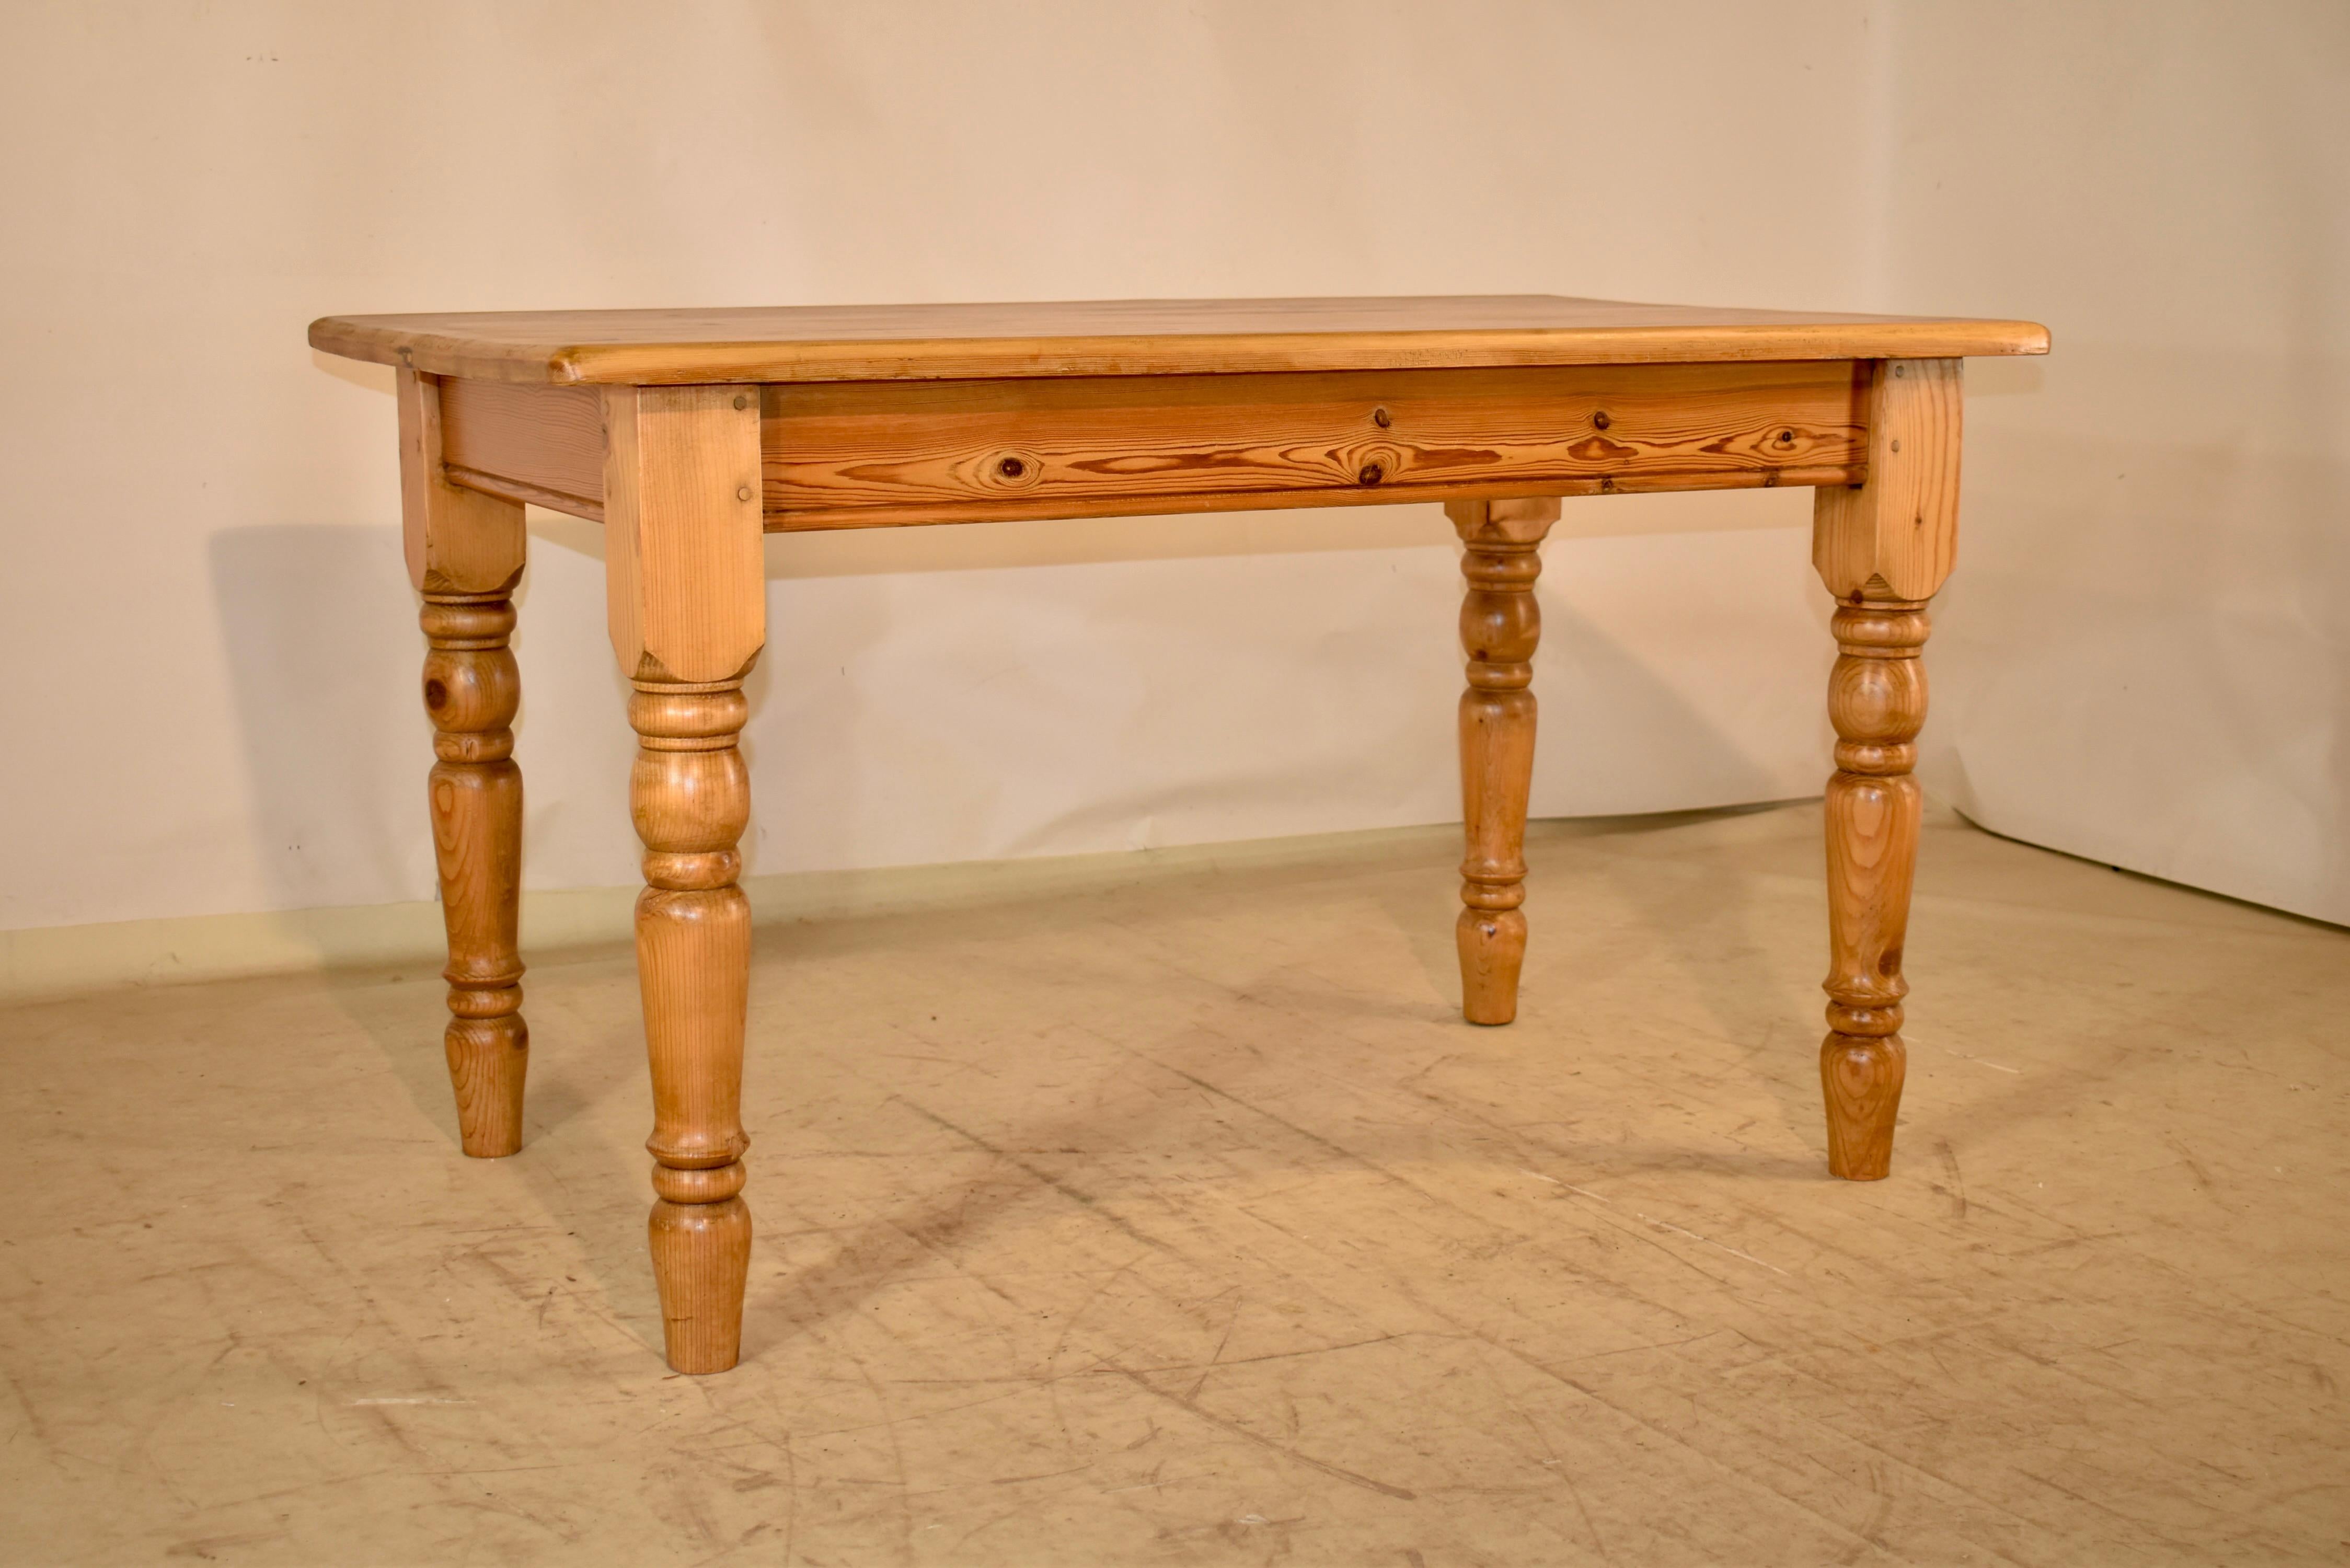 19th century pine farm table from England.  The top is made up from planks and have a lovely color and graining, in addition to the great knotting, which is a charming addition to the table.  The apron is simple and measures 25.25 inches in height. 